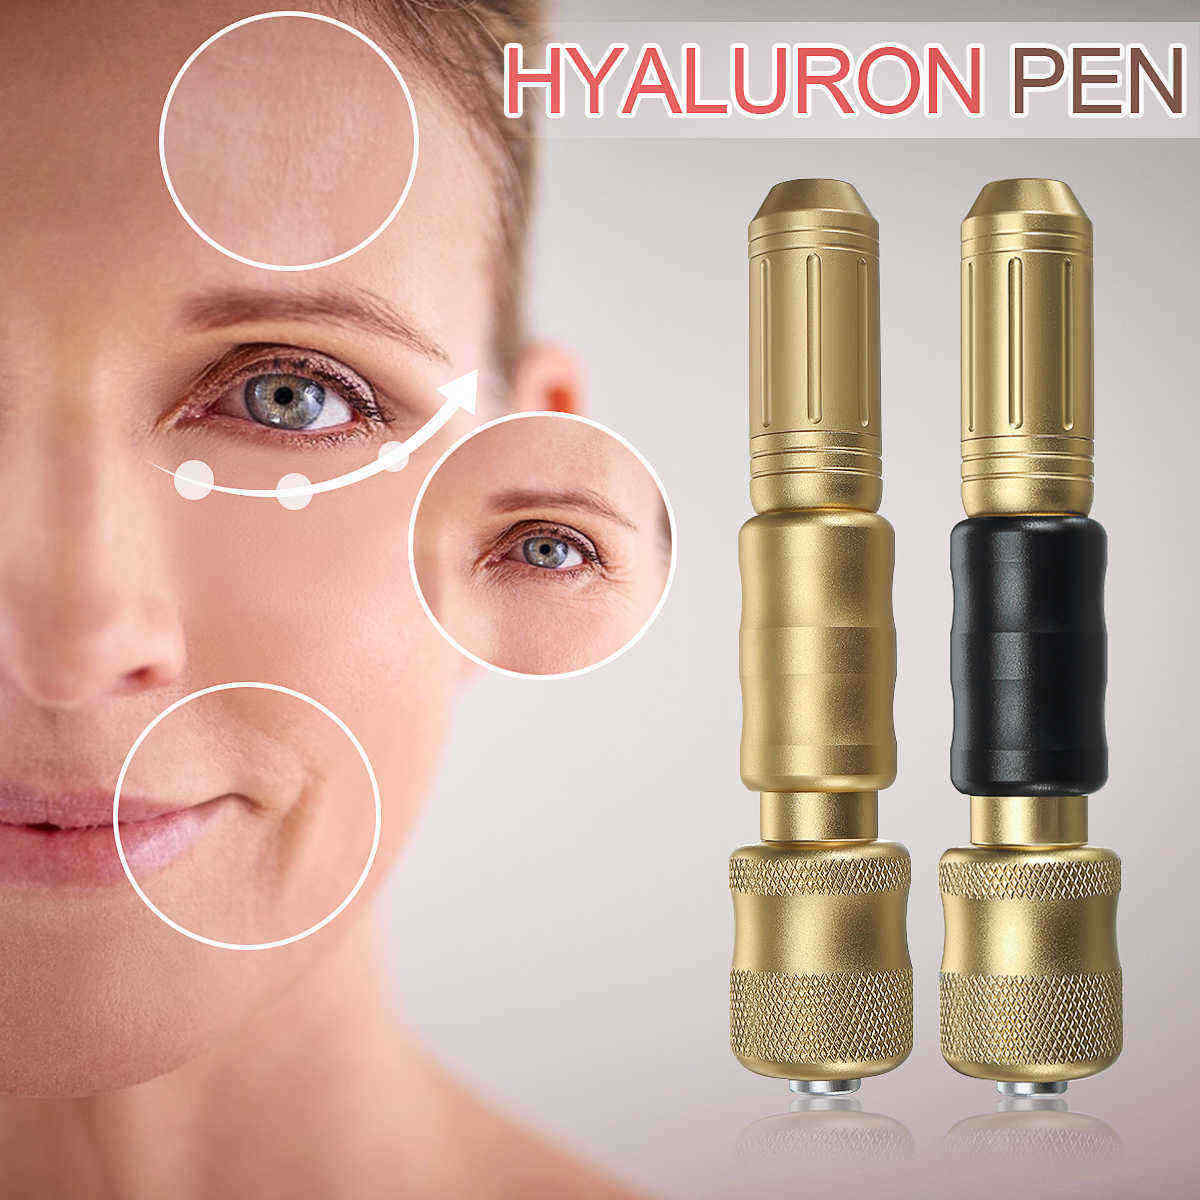 017mm-Hyaluron-Injection-Pen-Micro-Anti-Aging-Hyaluron-Pen-Skin-Care-Wrinkles-Removal-Beauty-Machine-1567695